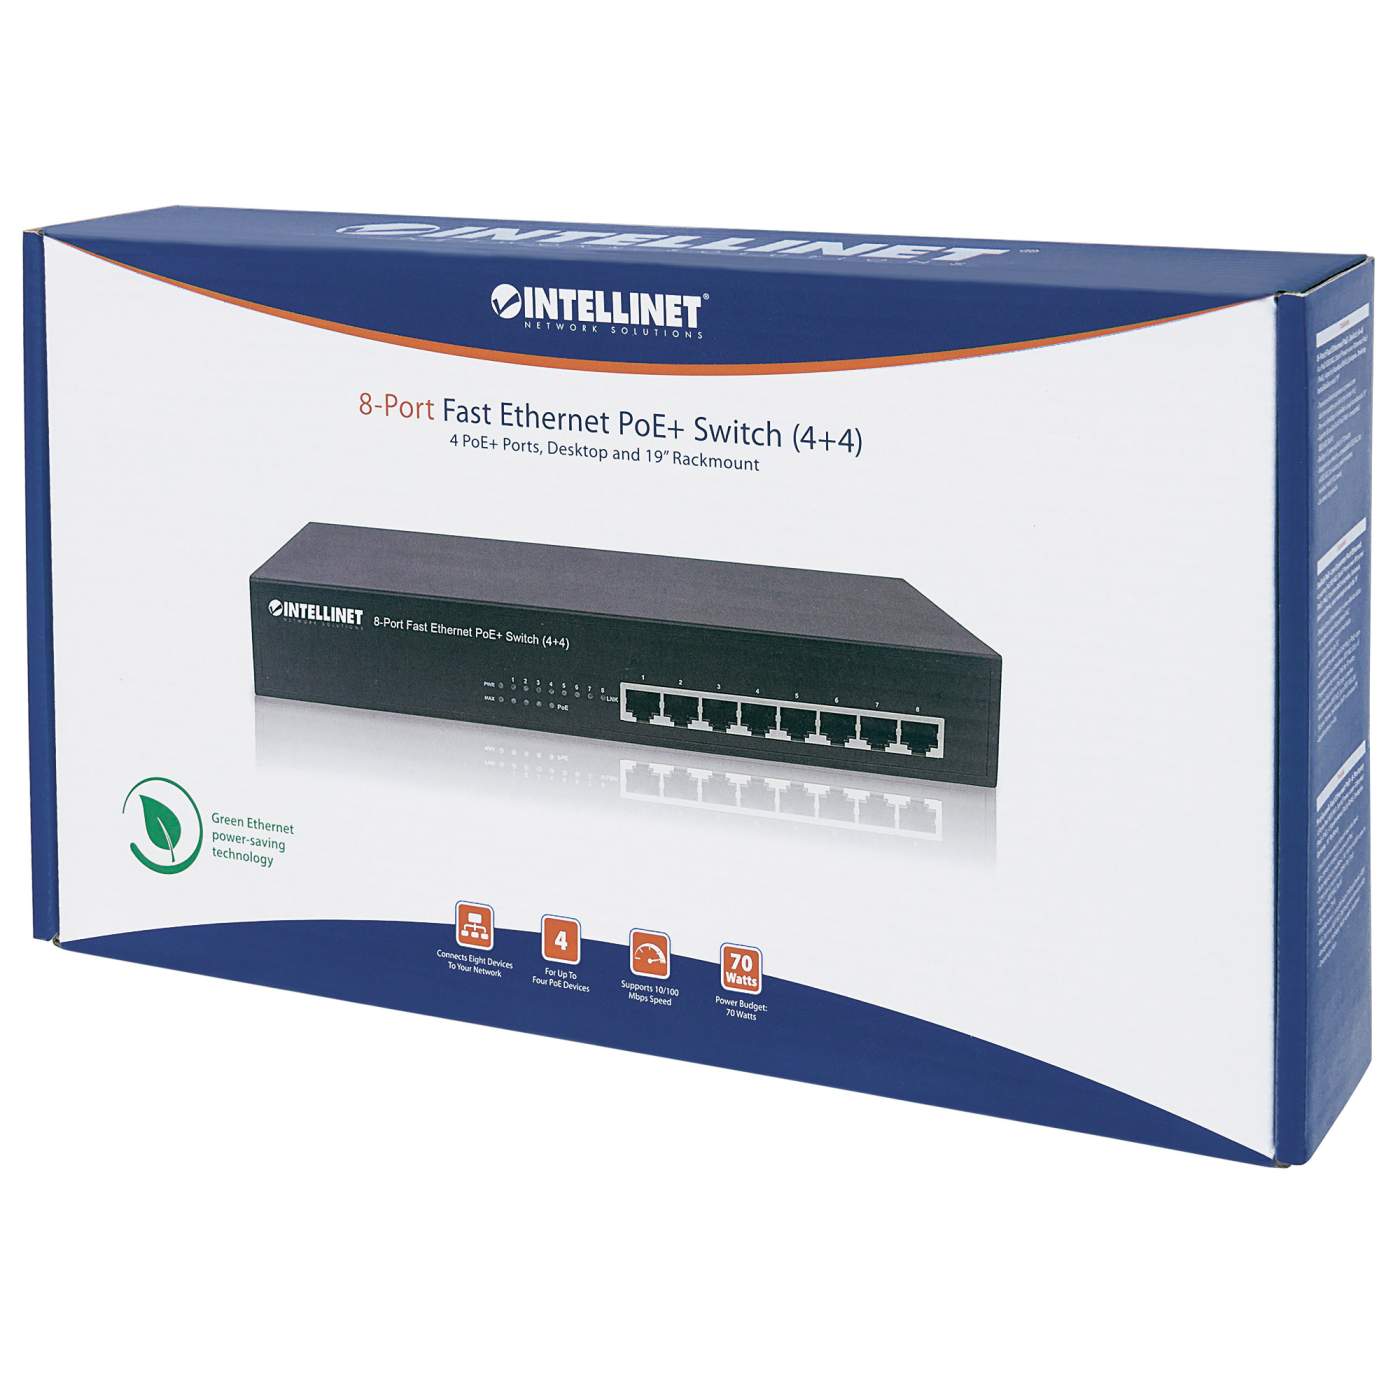 8-Port Fast Ethernet PoE+ Switch Packaging Image 2